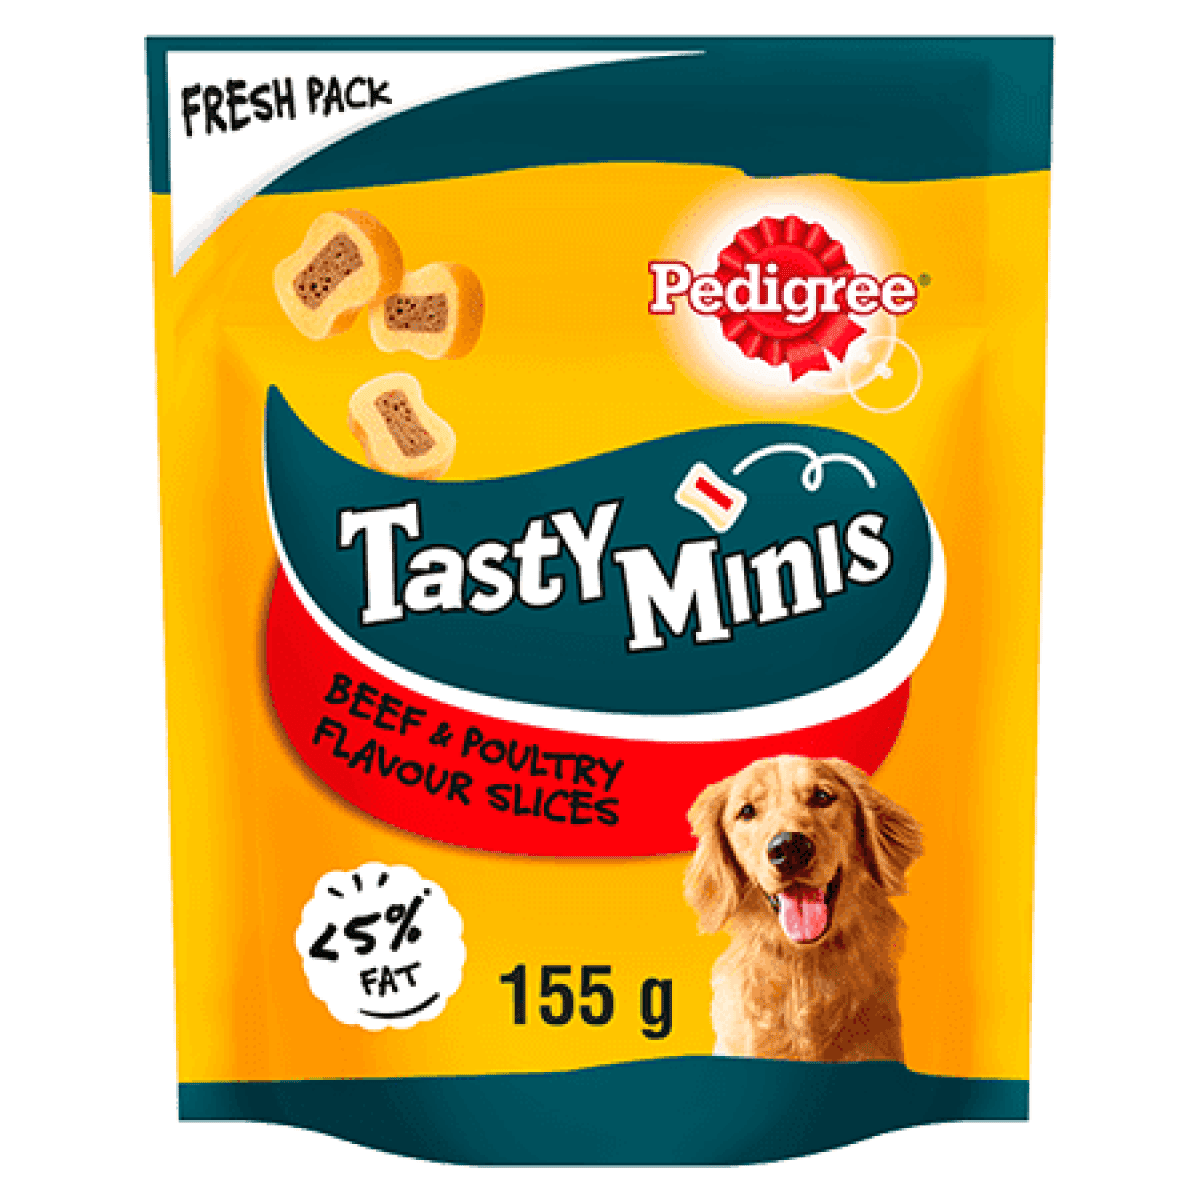 Pedigree Tasty Minis Beef & Poultry Slices 155g – Pawfect Supplies Ltd Product Image